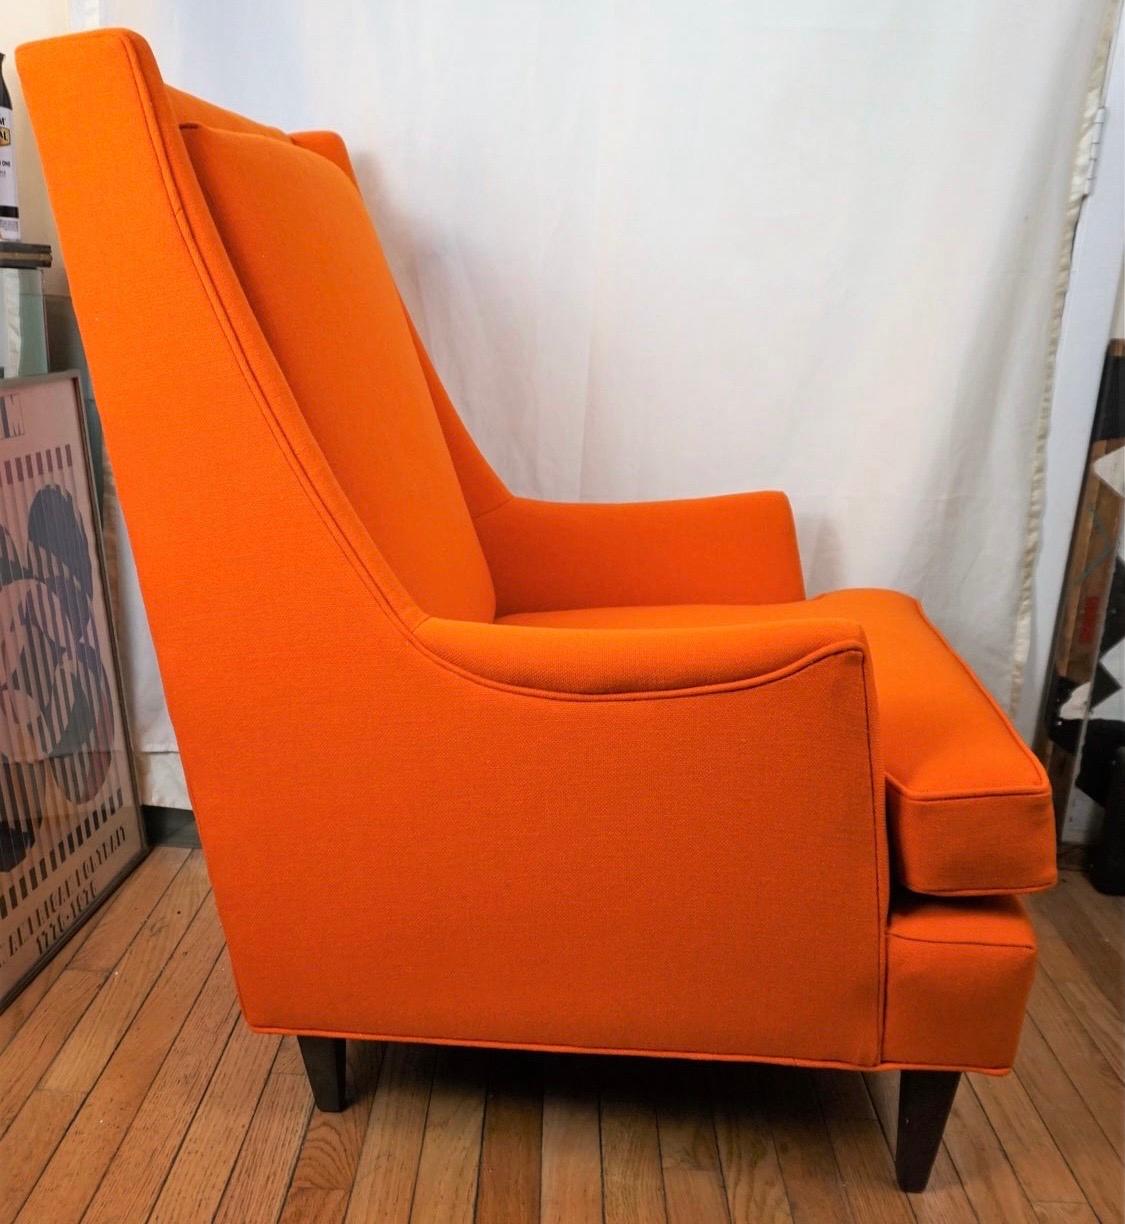 Mid-Century Modern Milo Baughman for James Inc. Signed Midcentury Club Chair Newly Upholstered